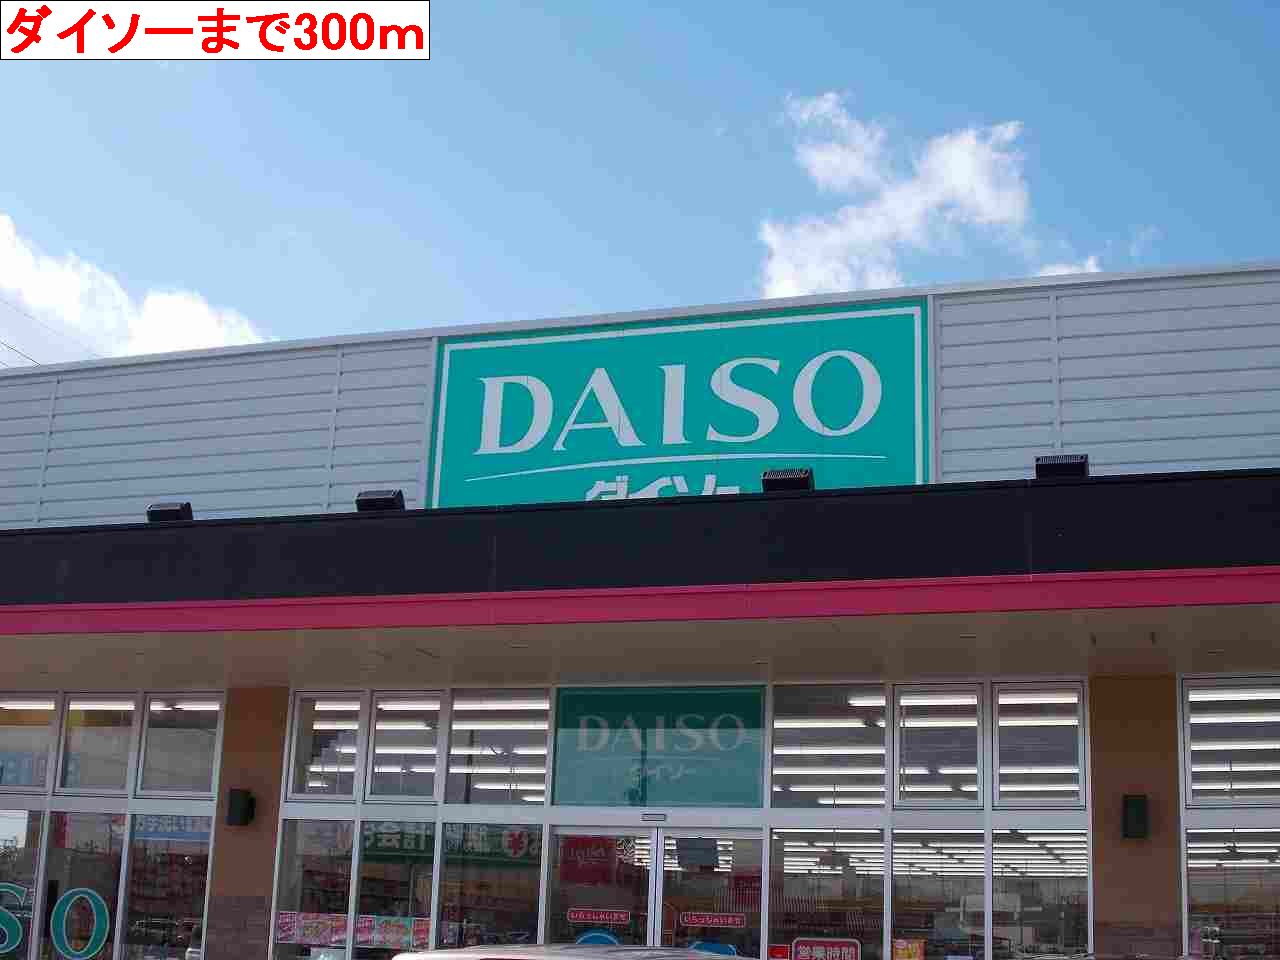 Home center. 300m to Daiso (hardware store)